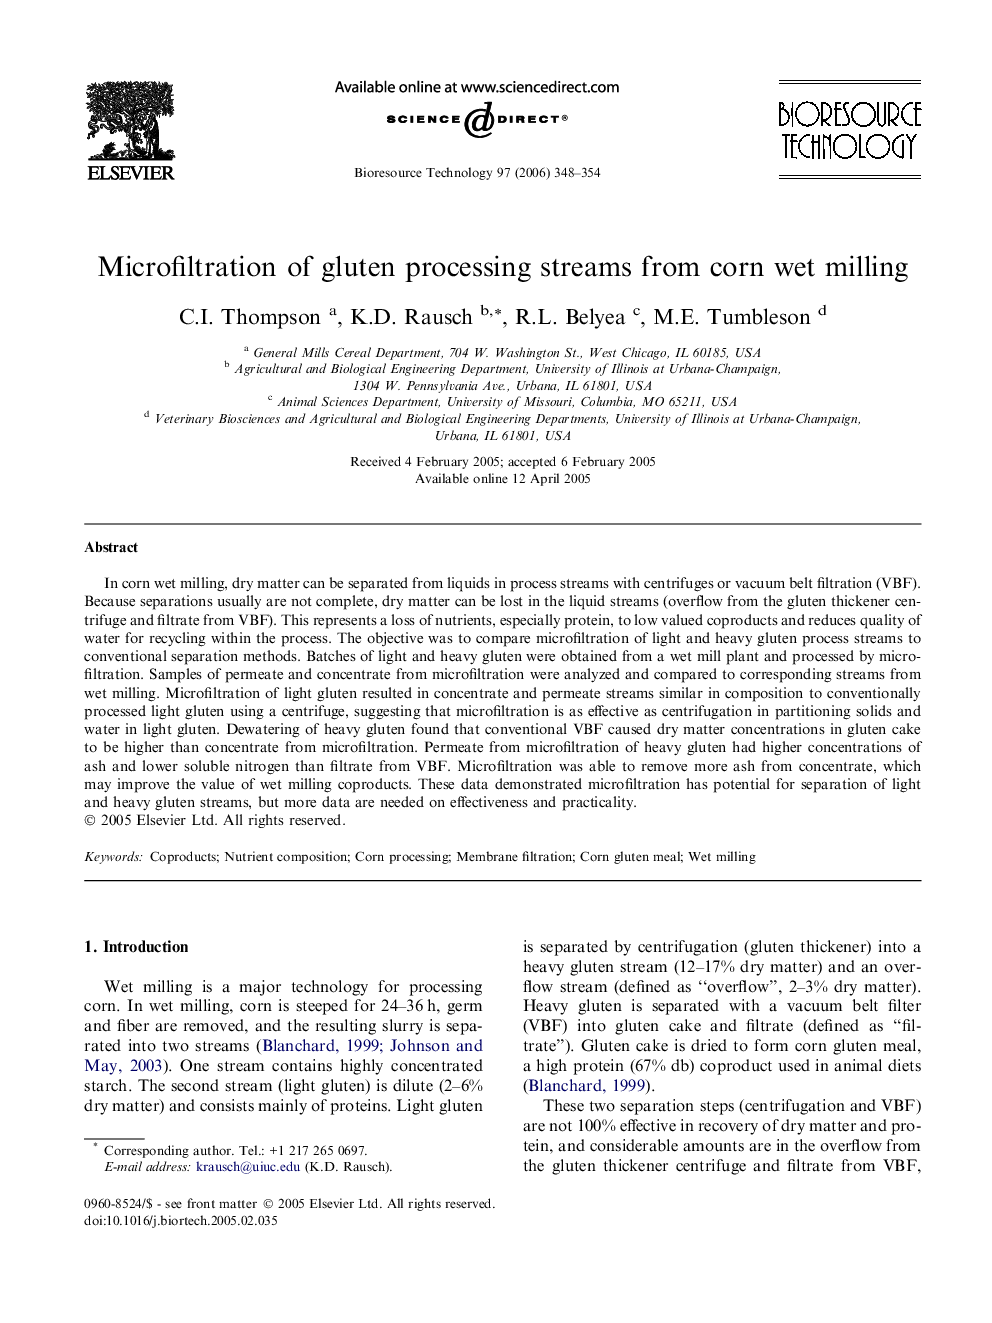 Microfiltration of gluten processing streams from corn wet milling